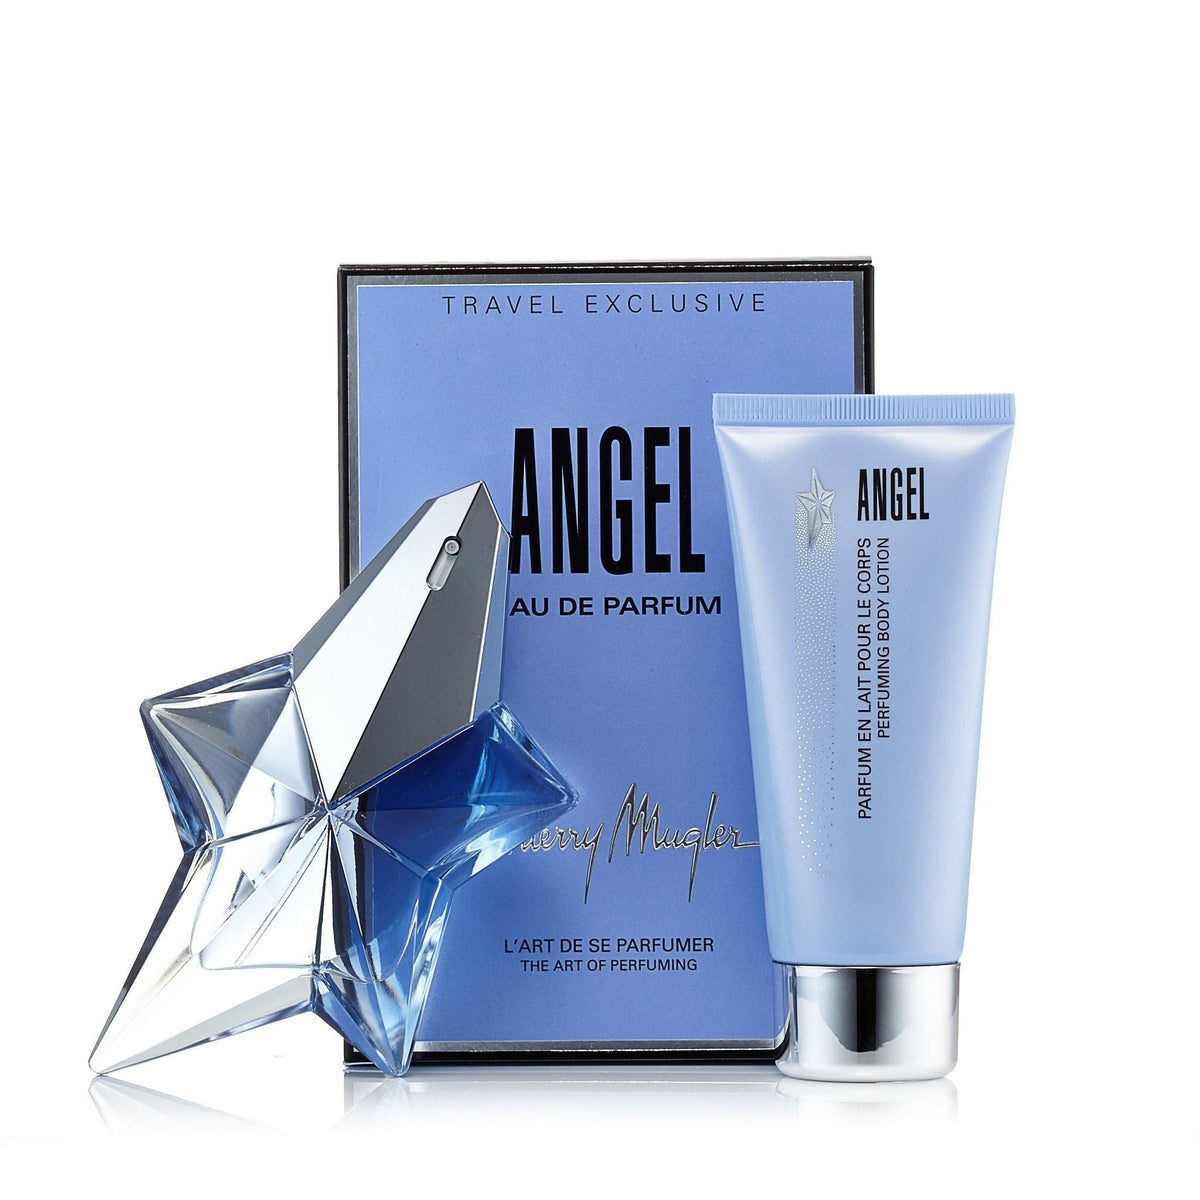 Angel Gift Set EDP and Body Lotion for Women by Thierry Mugler 1.7 oz.